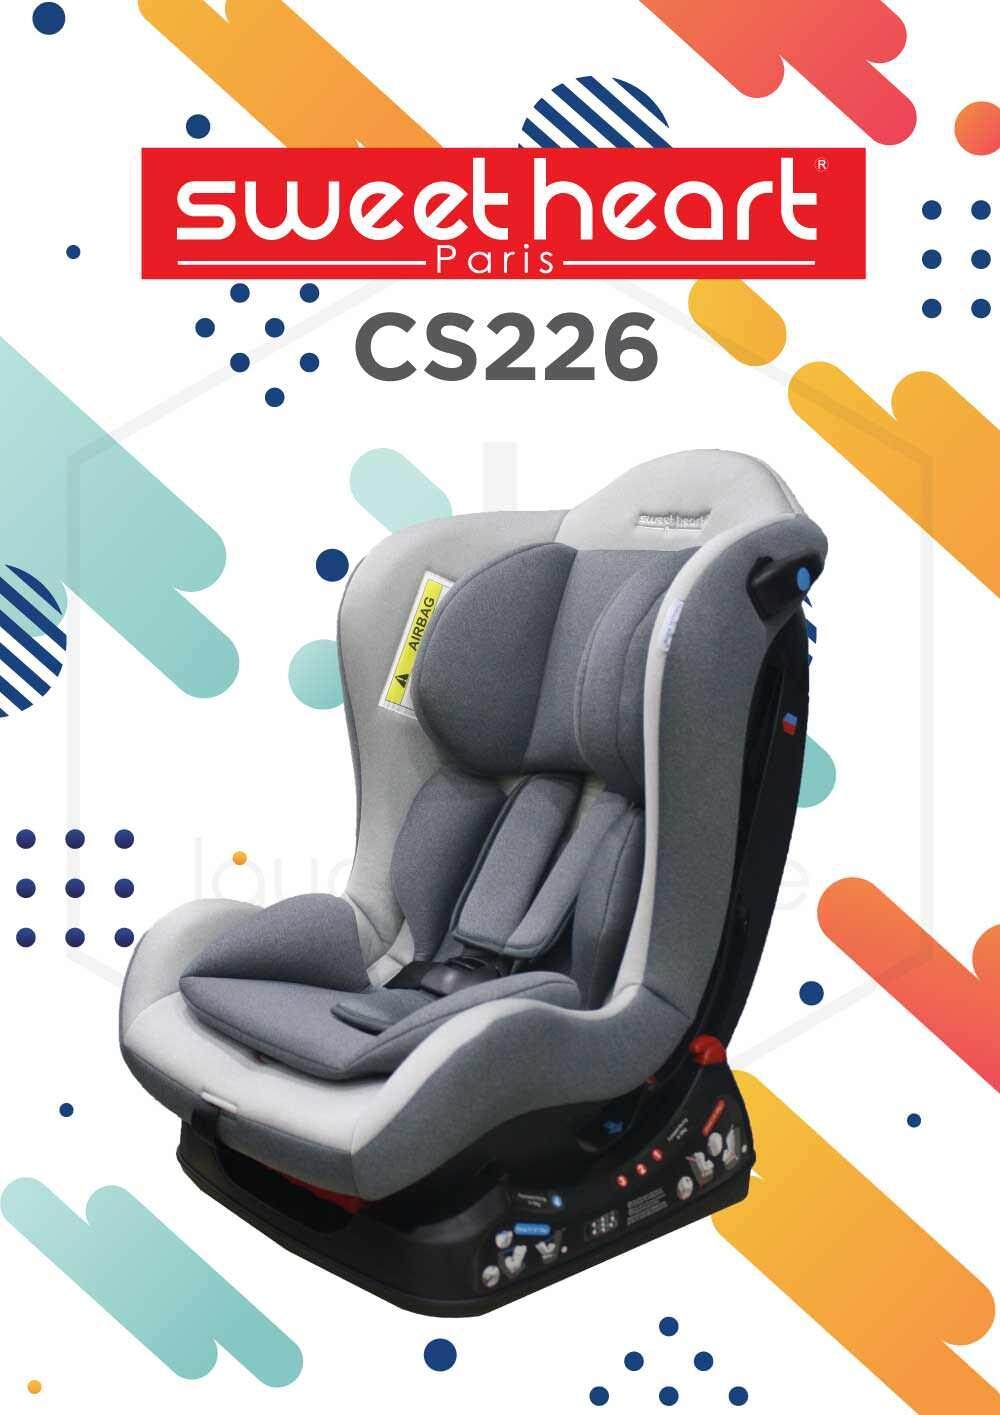 Sweet Heart Paris CS226 Group 01 Baby Car Seat Assurance JPJ Approved MIROS and ECE R44/04 Certified (Grey)